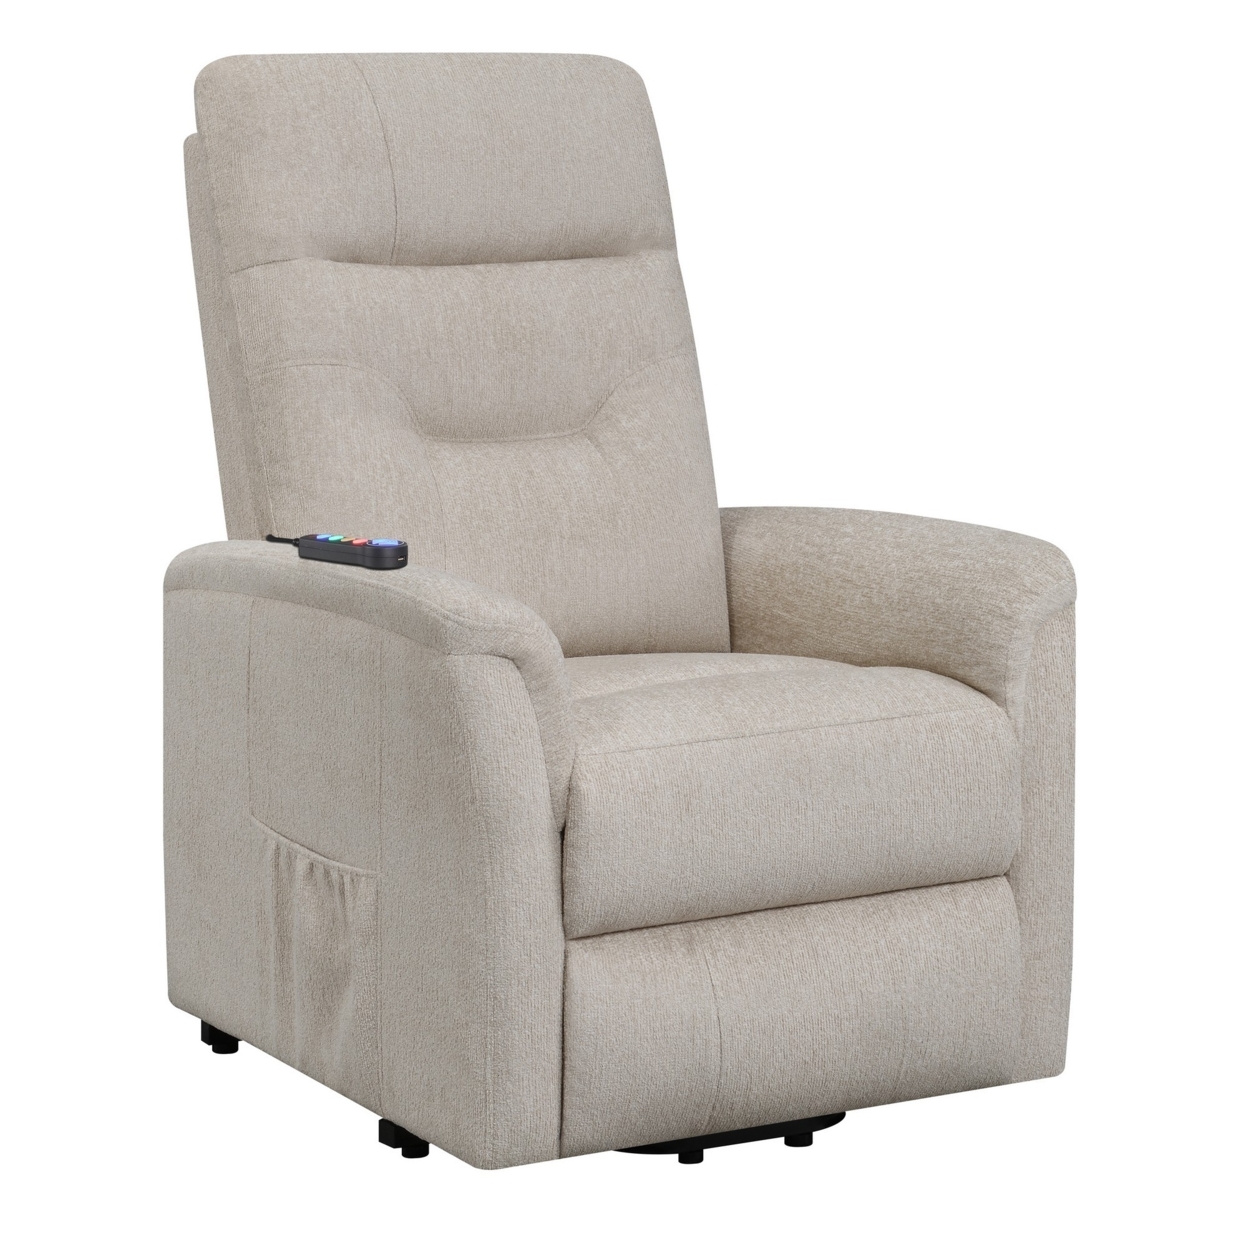 Fabric Power Lift Massage Chair With Tufted Stitched Accent, Beige- Saltoro Sherpi